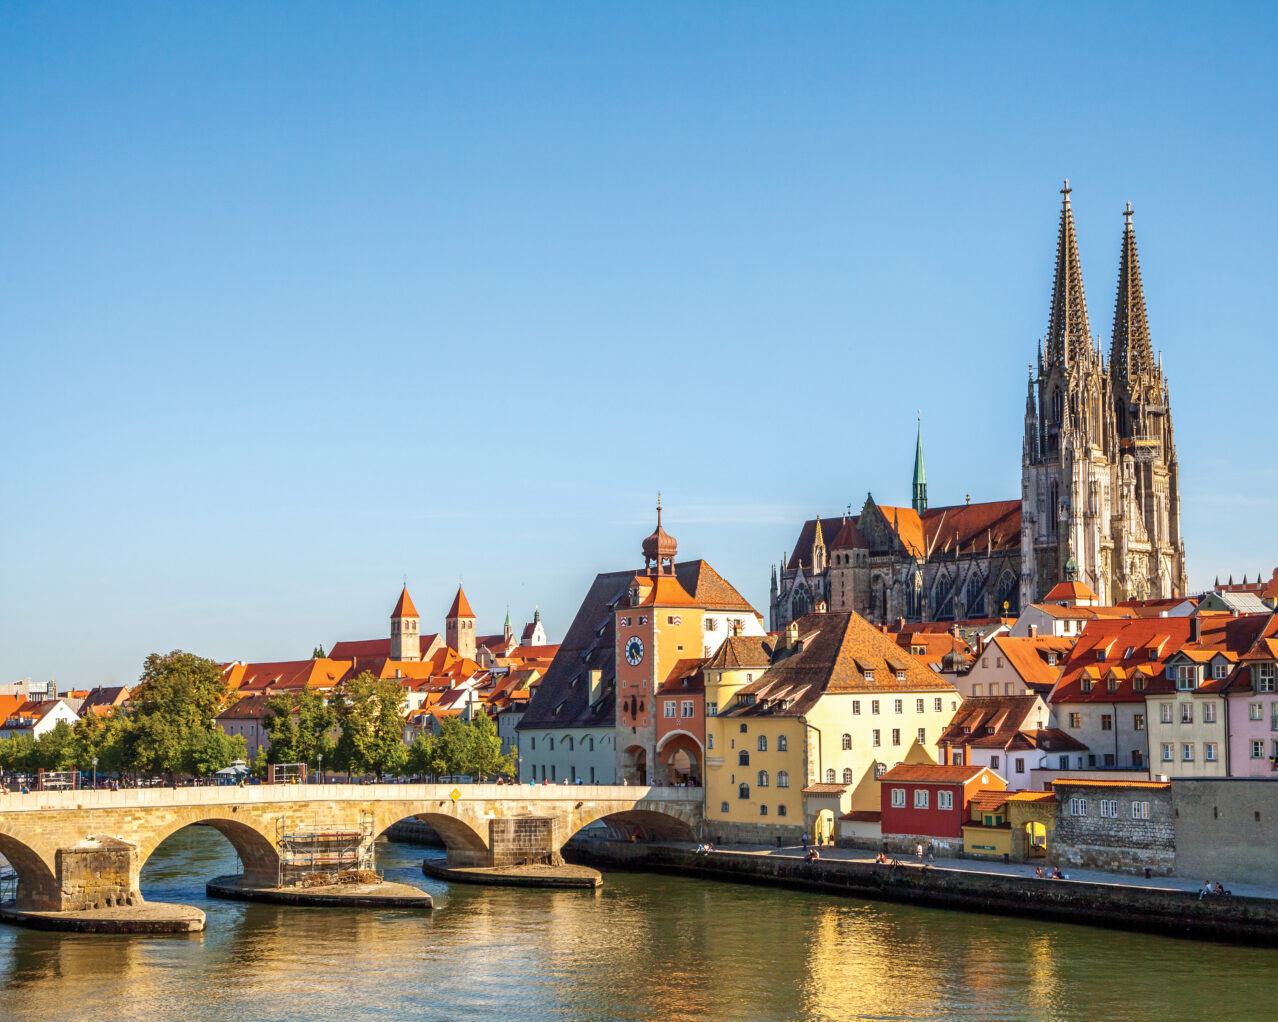 A view of Regensburg